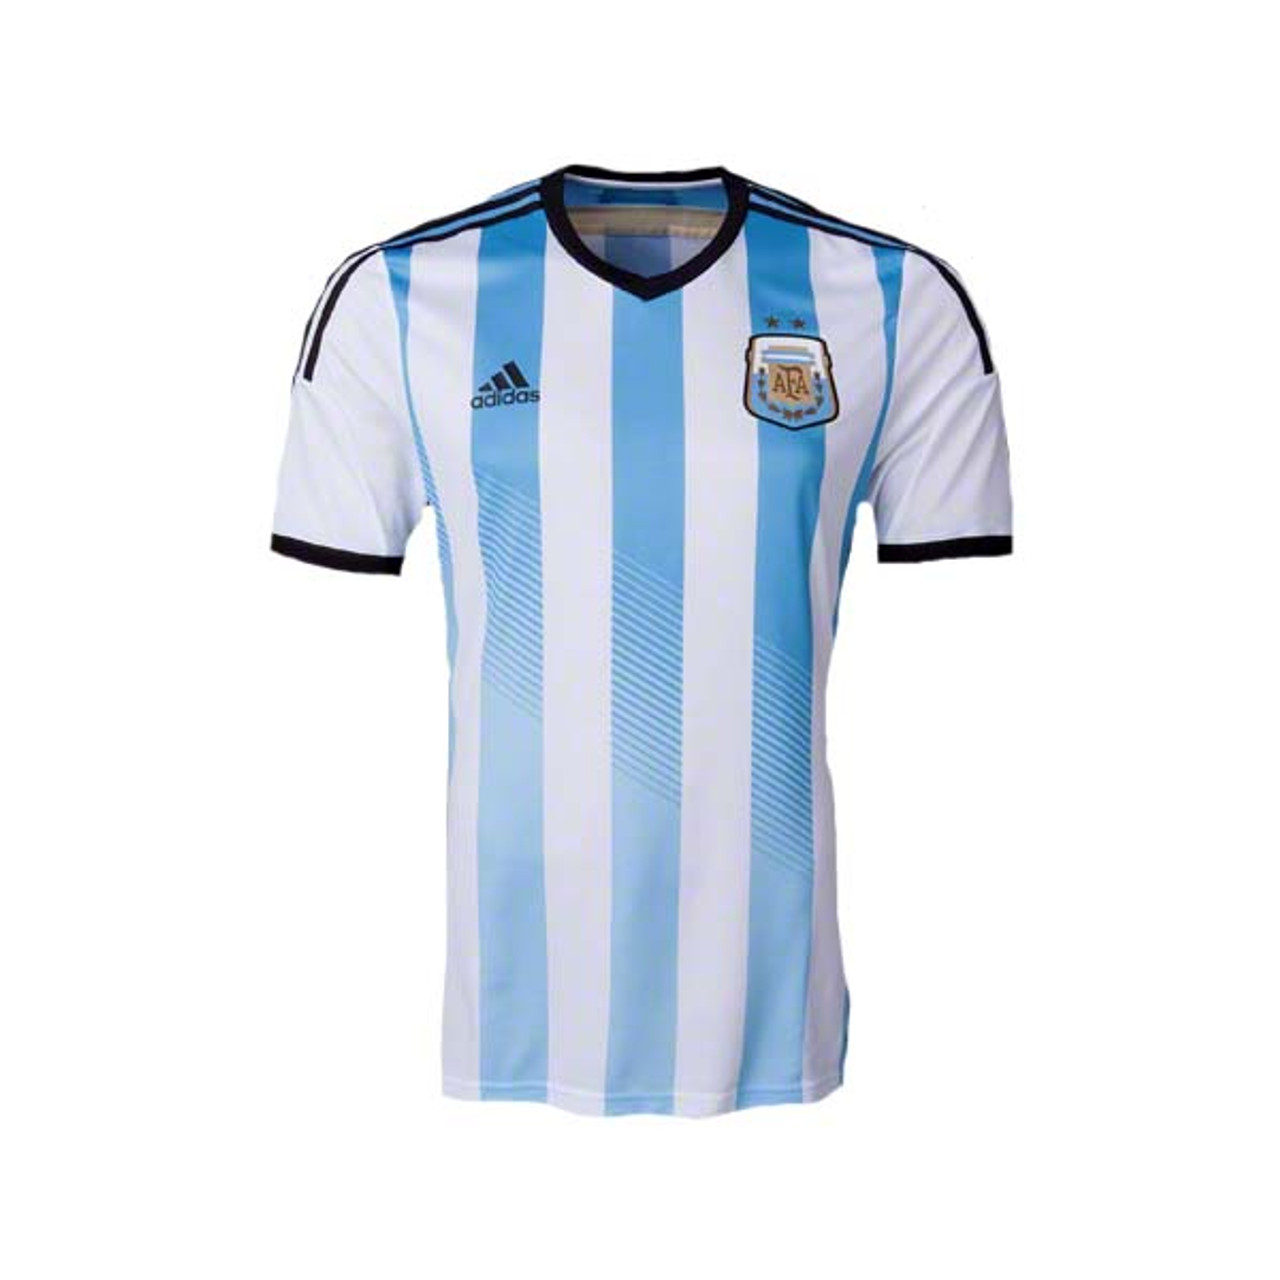 ADIDAS ARGENTINA WORLD CUP 2014 HOME 